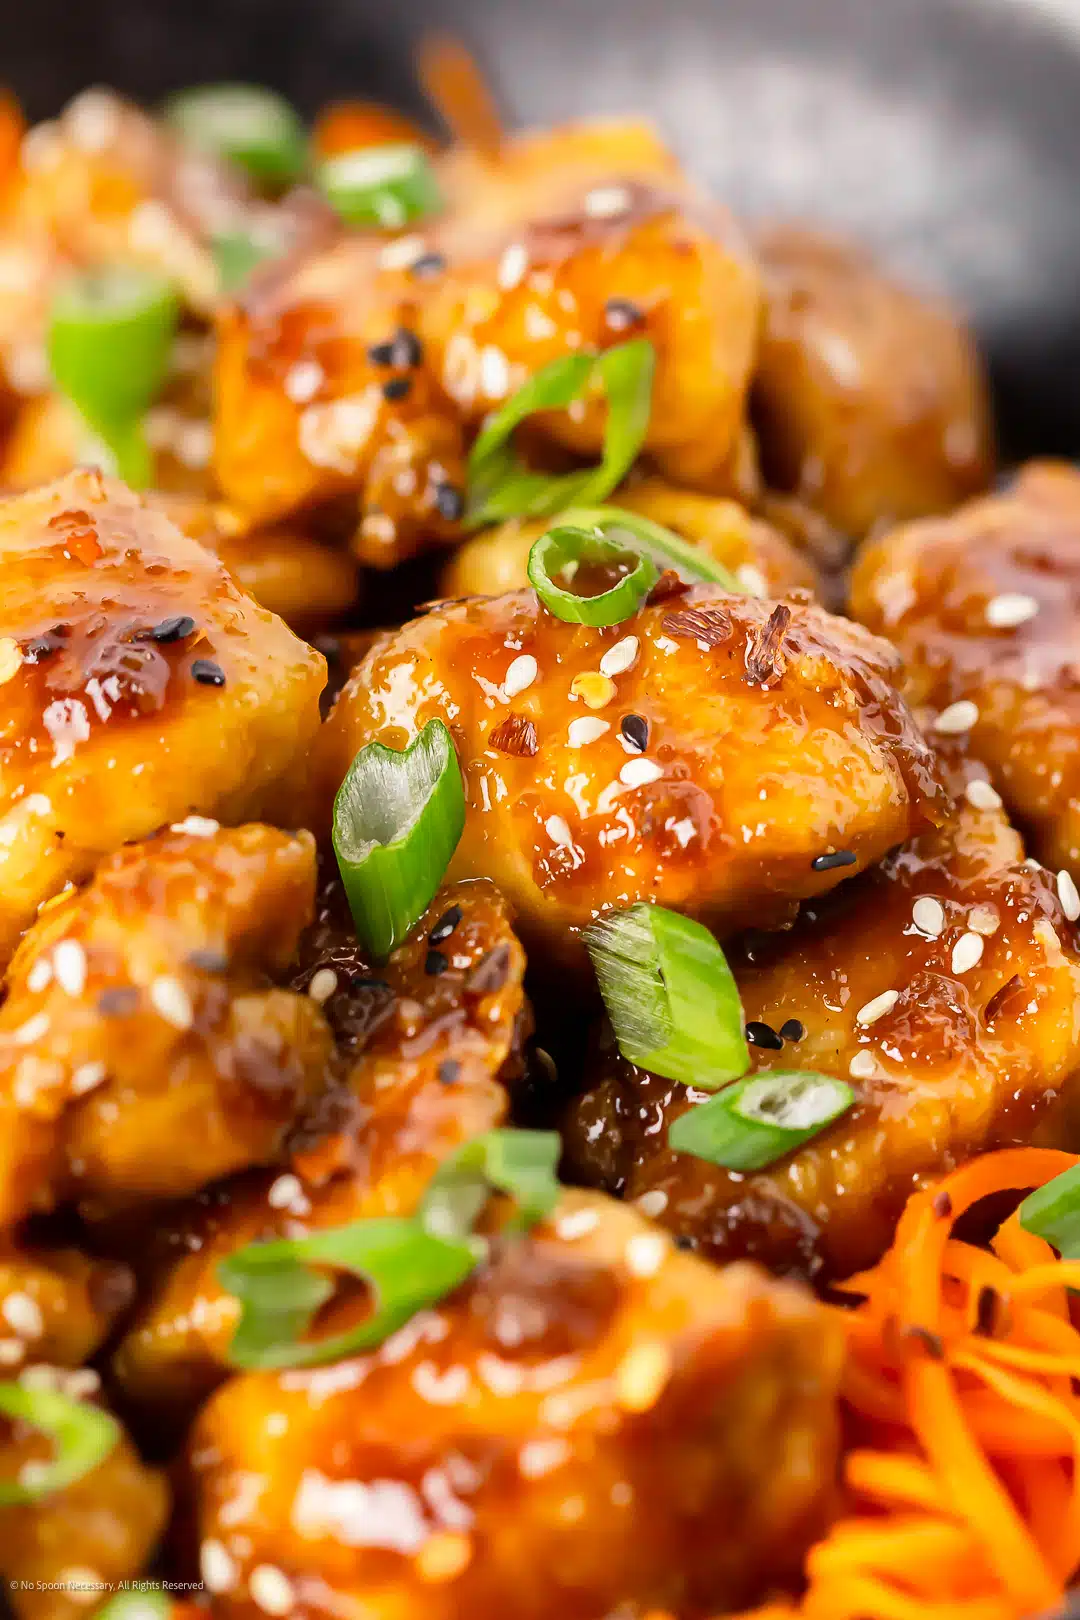 Angled, close-up photo illustrating the sticky sauce on honey garlic chicken noodles.